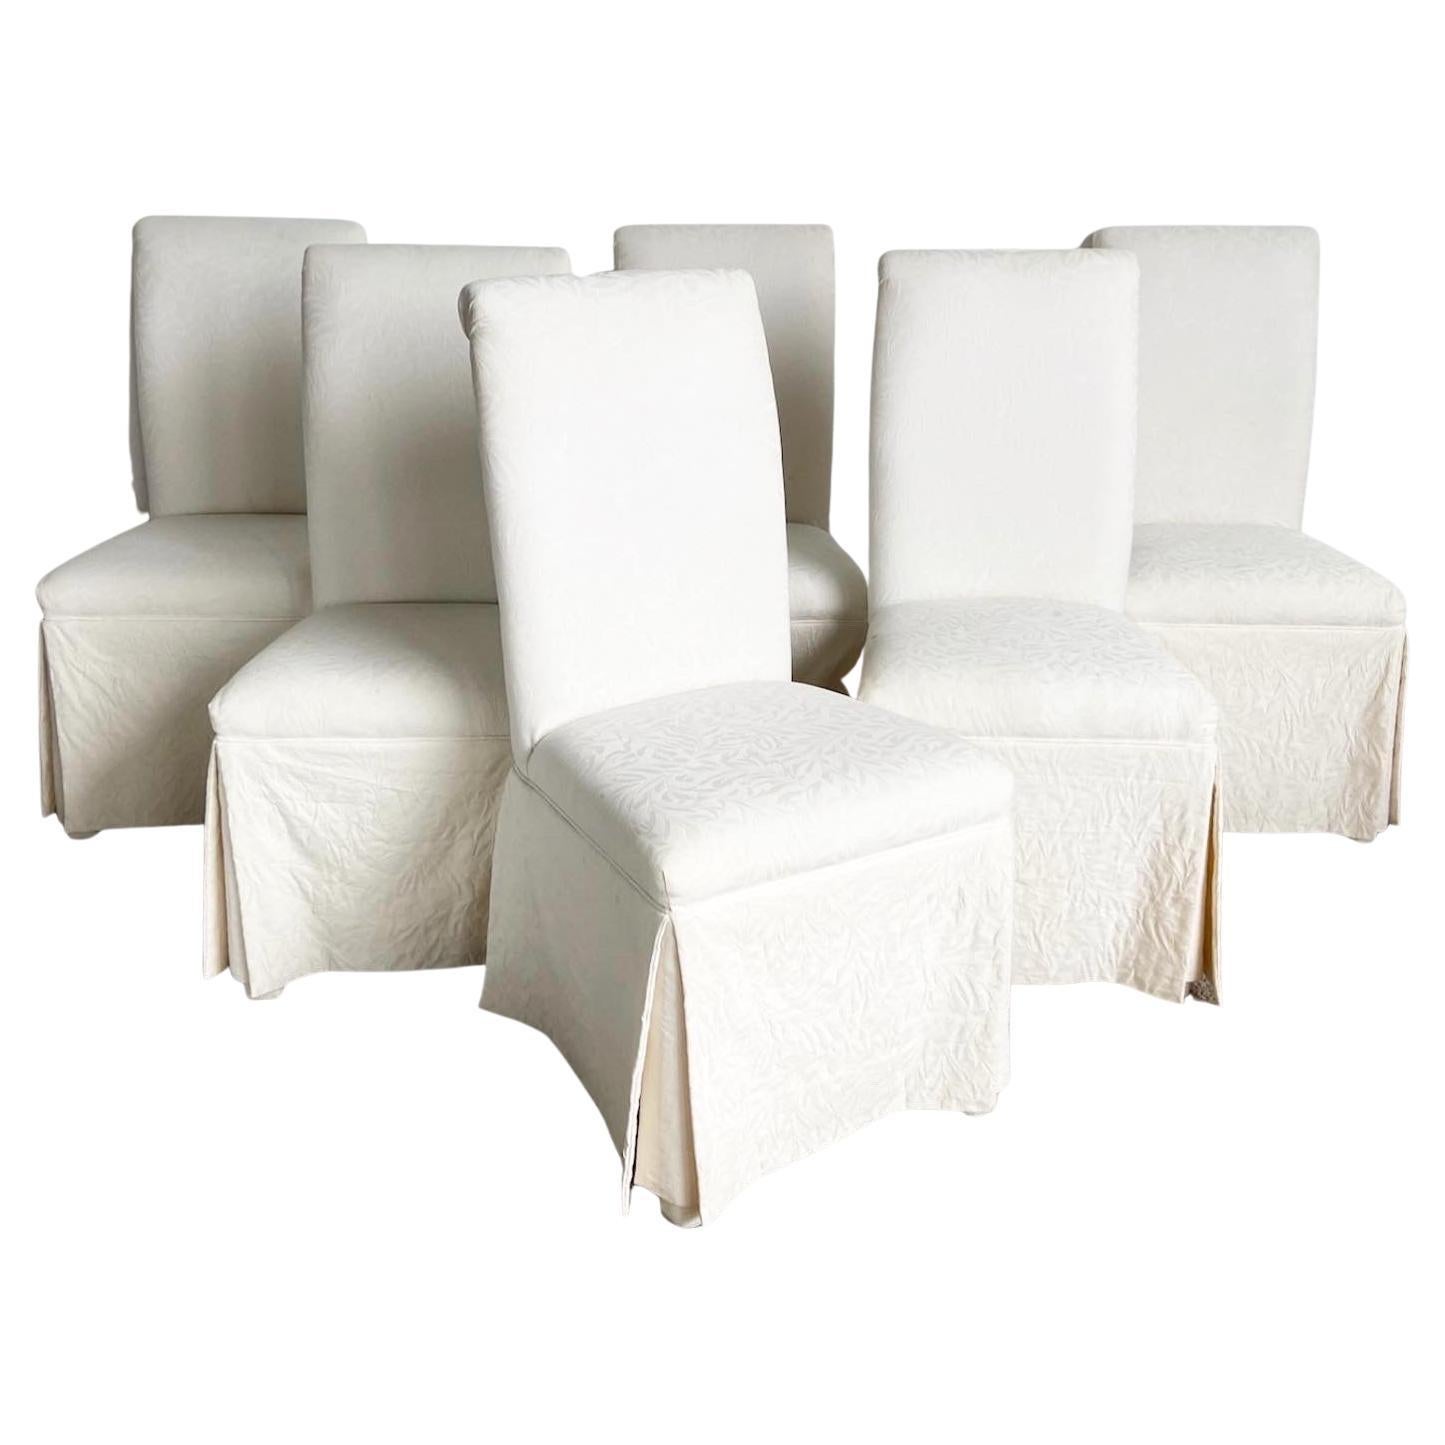 Regency Chic White Skirted Dining Chairs - Set of 6